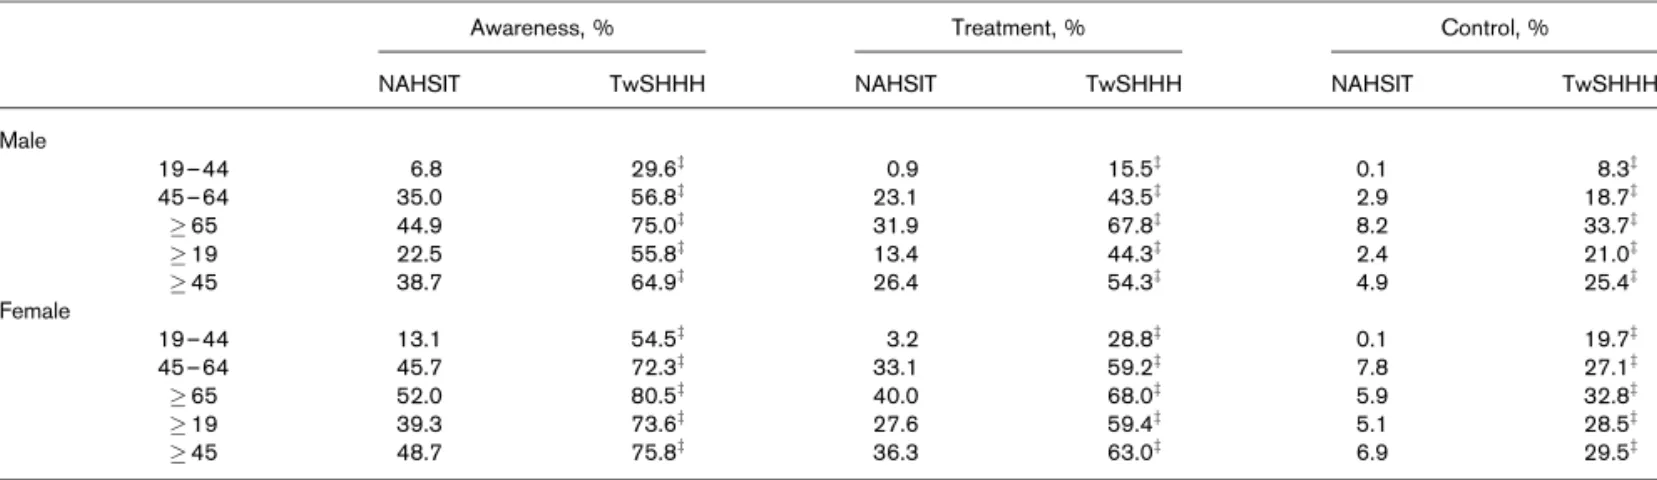 Table 3 Trends in hypertension awareness, treatment, and control in the adult population during two nationwide surveys in Taiwan